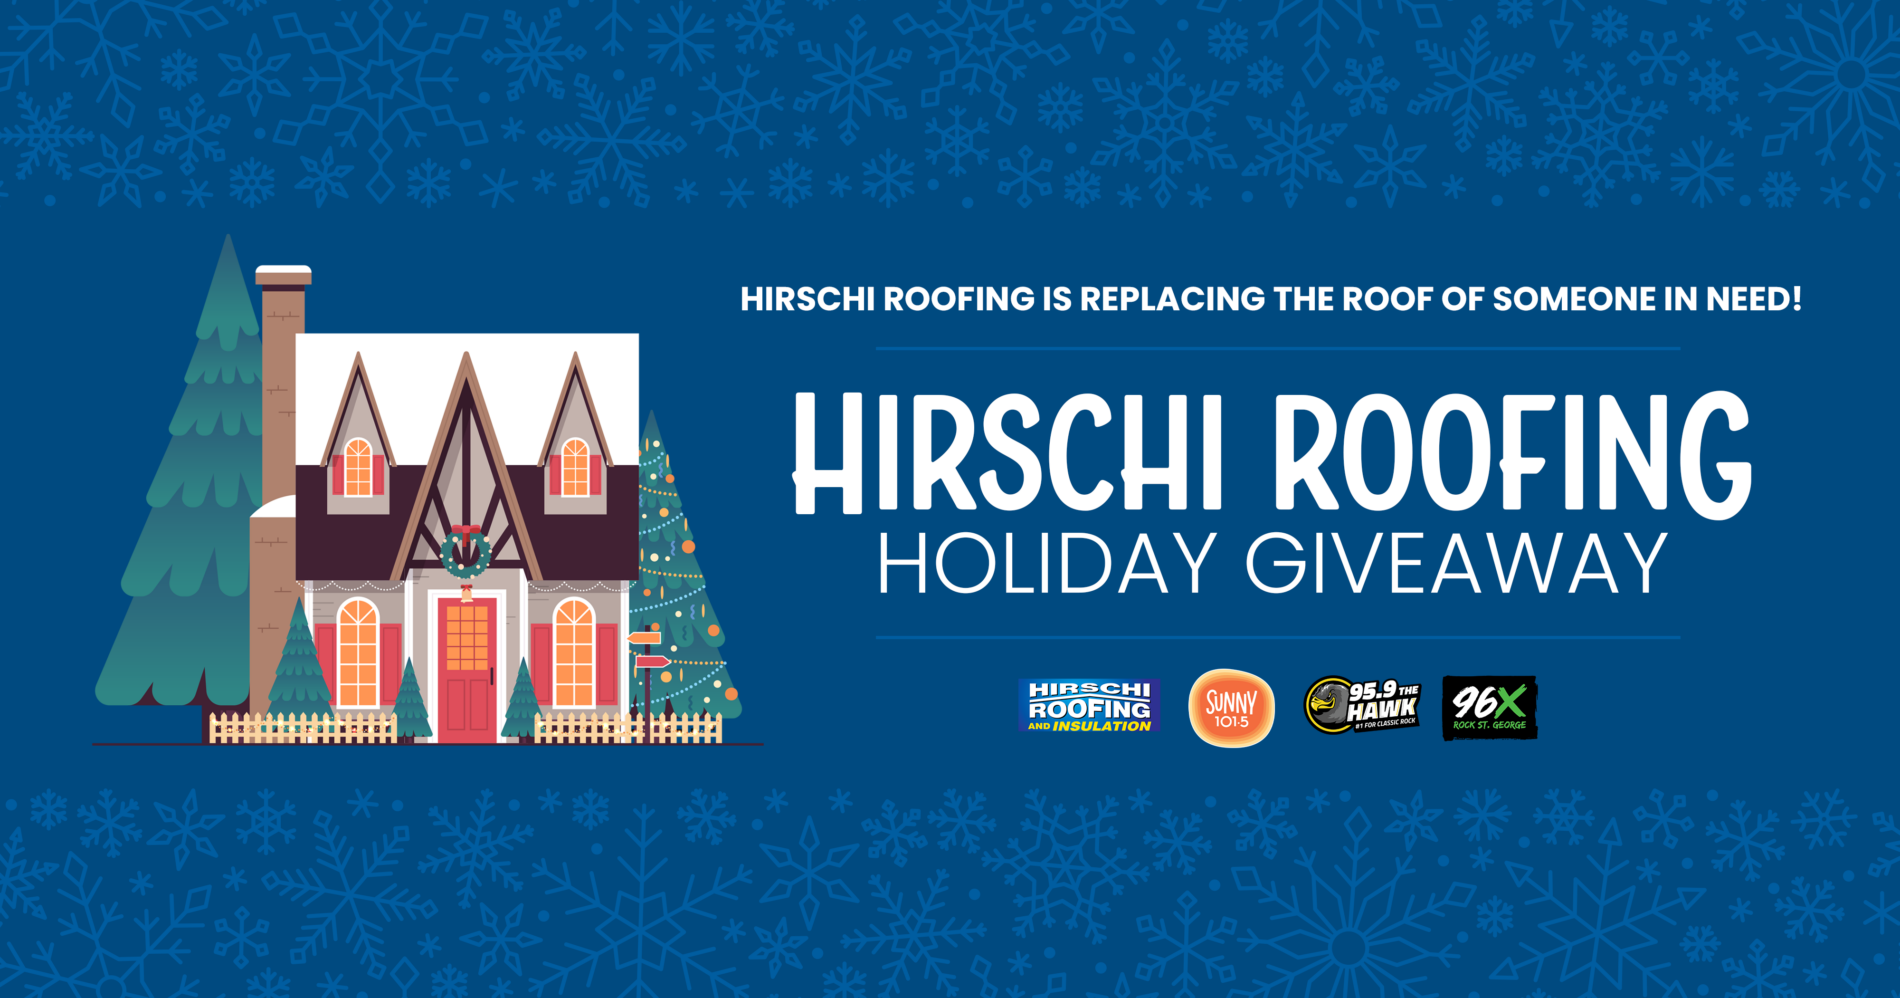 Hirschi Roofing Holiday Giveaway